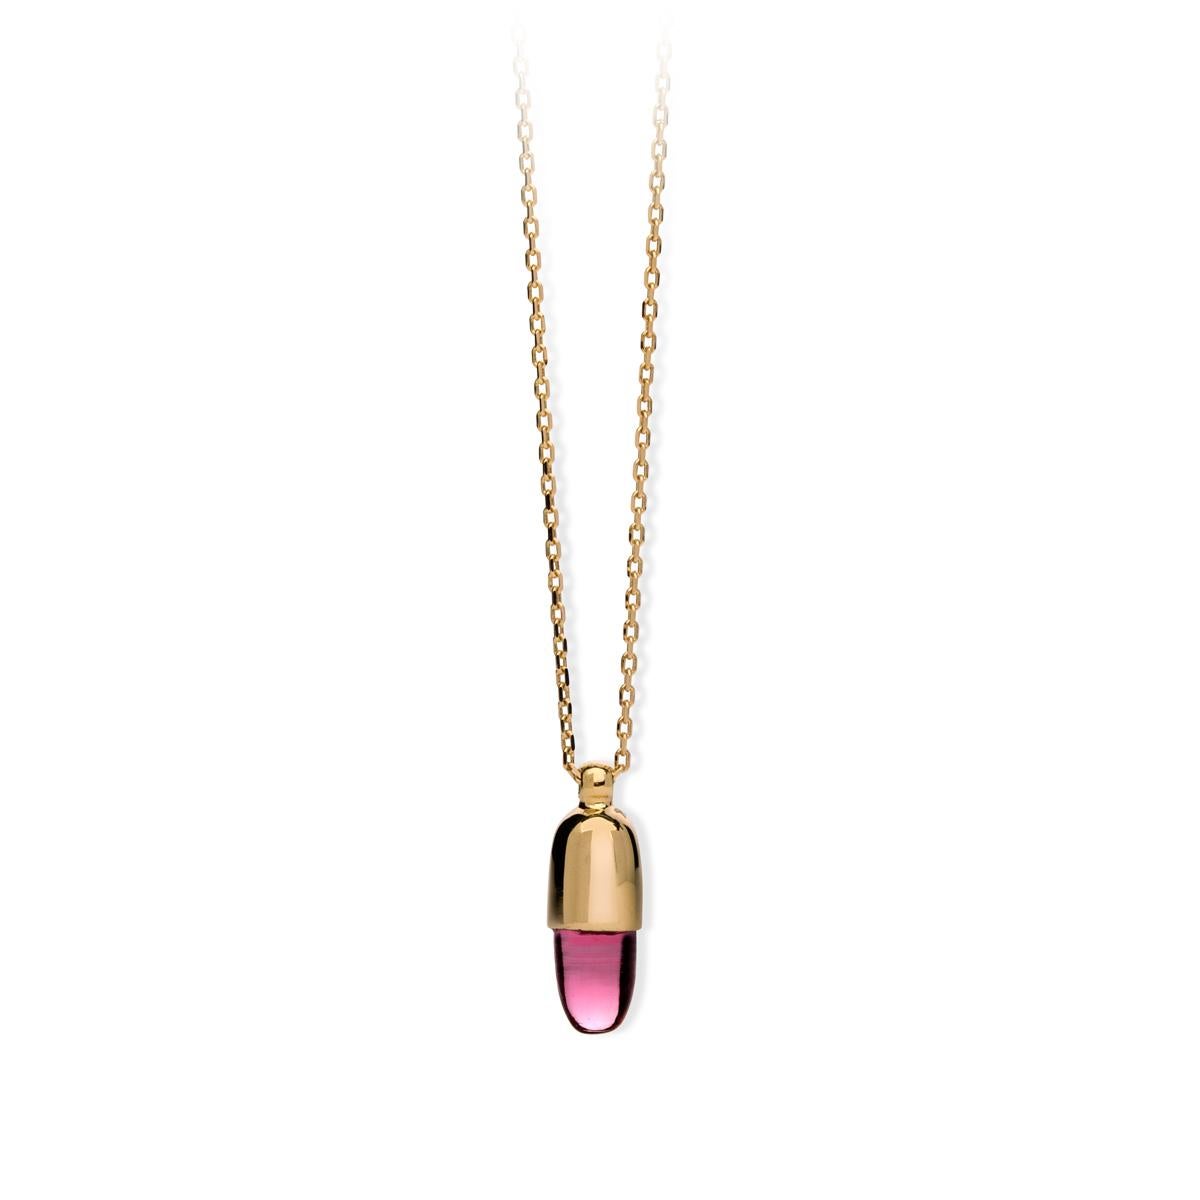 Maviada's Skopelos 18k solid gold pendant, 5x7mm smooth cut bullet shaped stone.
Our cheerful 18k solid gold pendants come in yellow gold or rose gold and are offered in a wide range of coloured gemstones.
The bullet shaped smooth cut stones measure